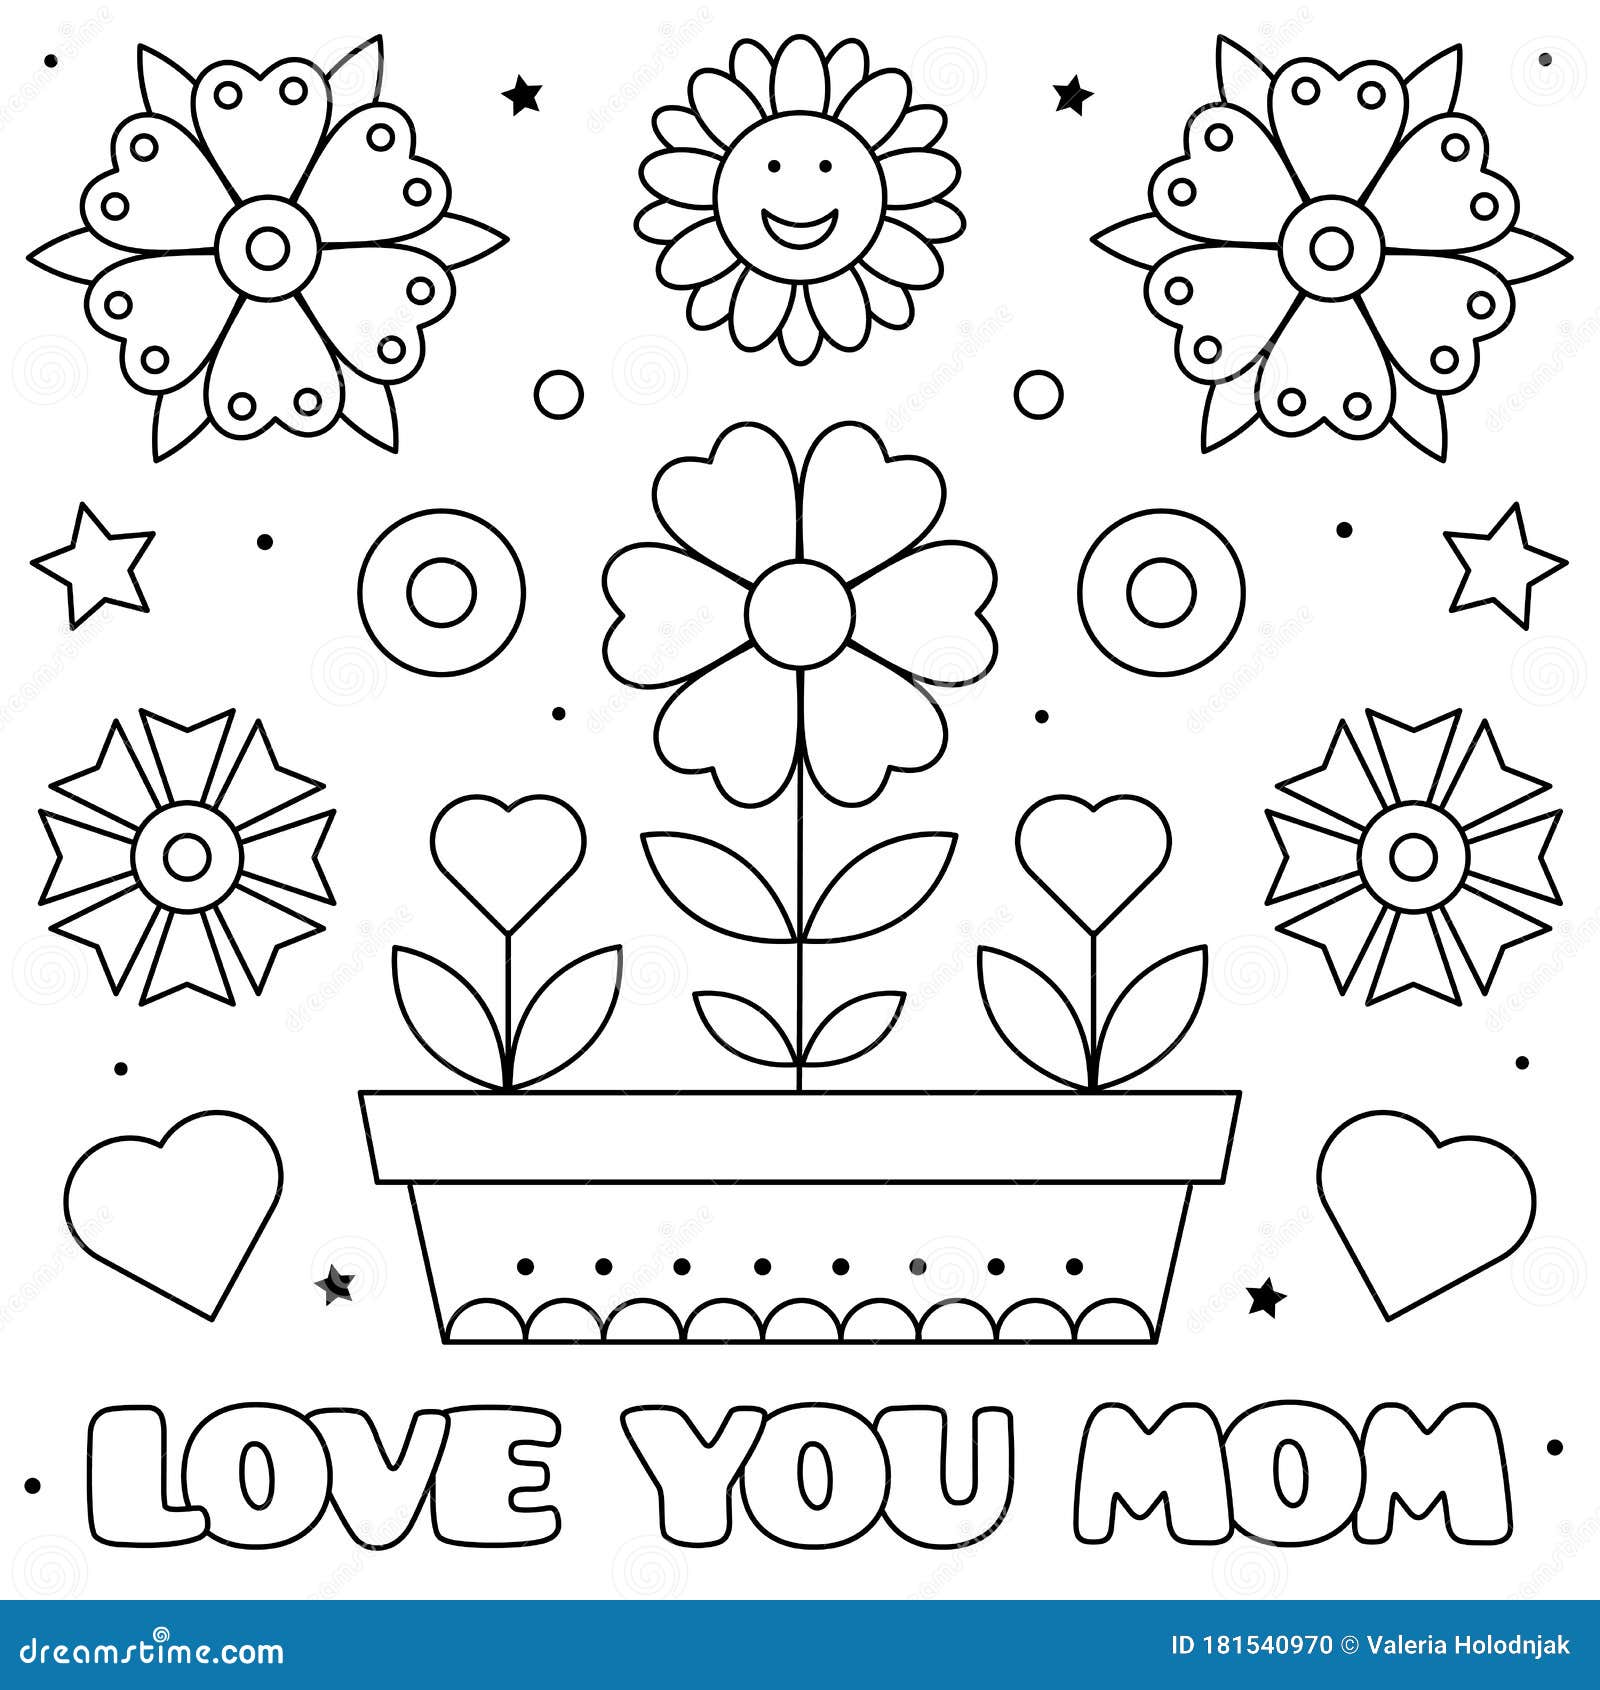 Love you mom coloring page vector illustration of flowers stock vector